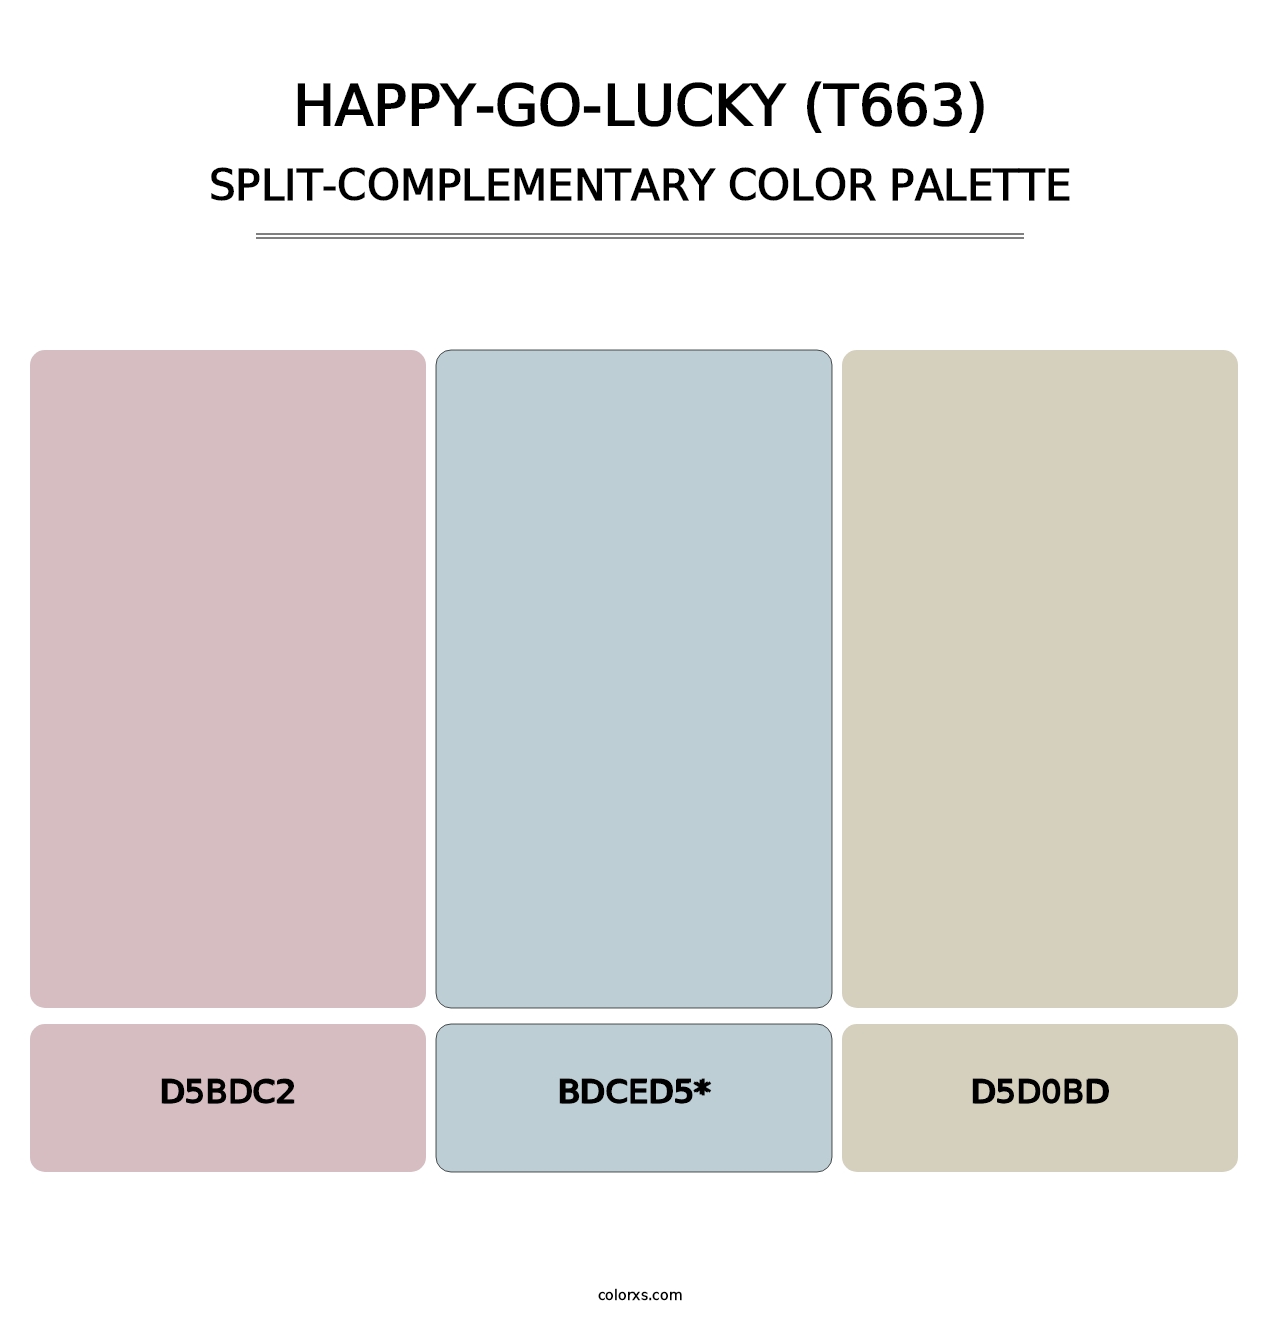 Happy-Go-Lucky (T663) - Split-Complementary Color Palette